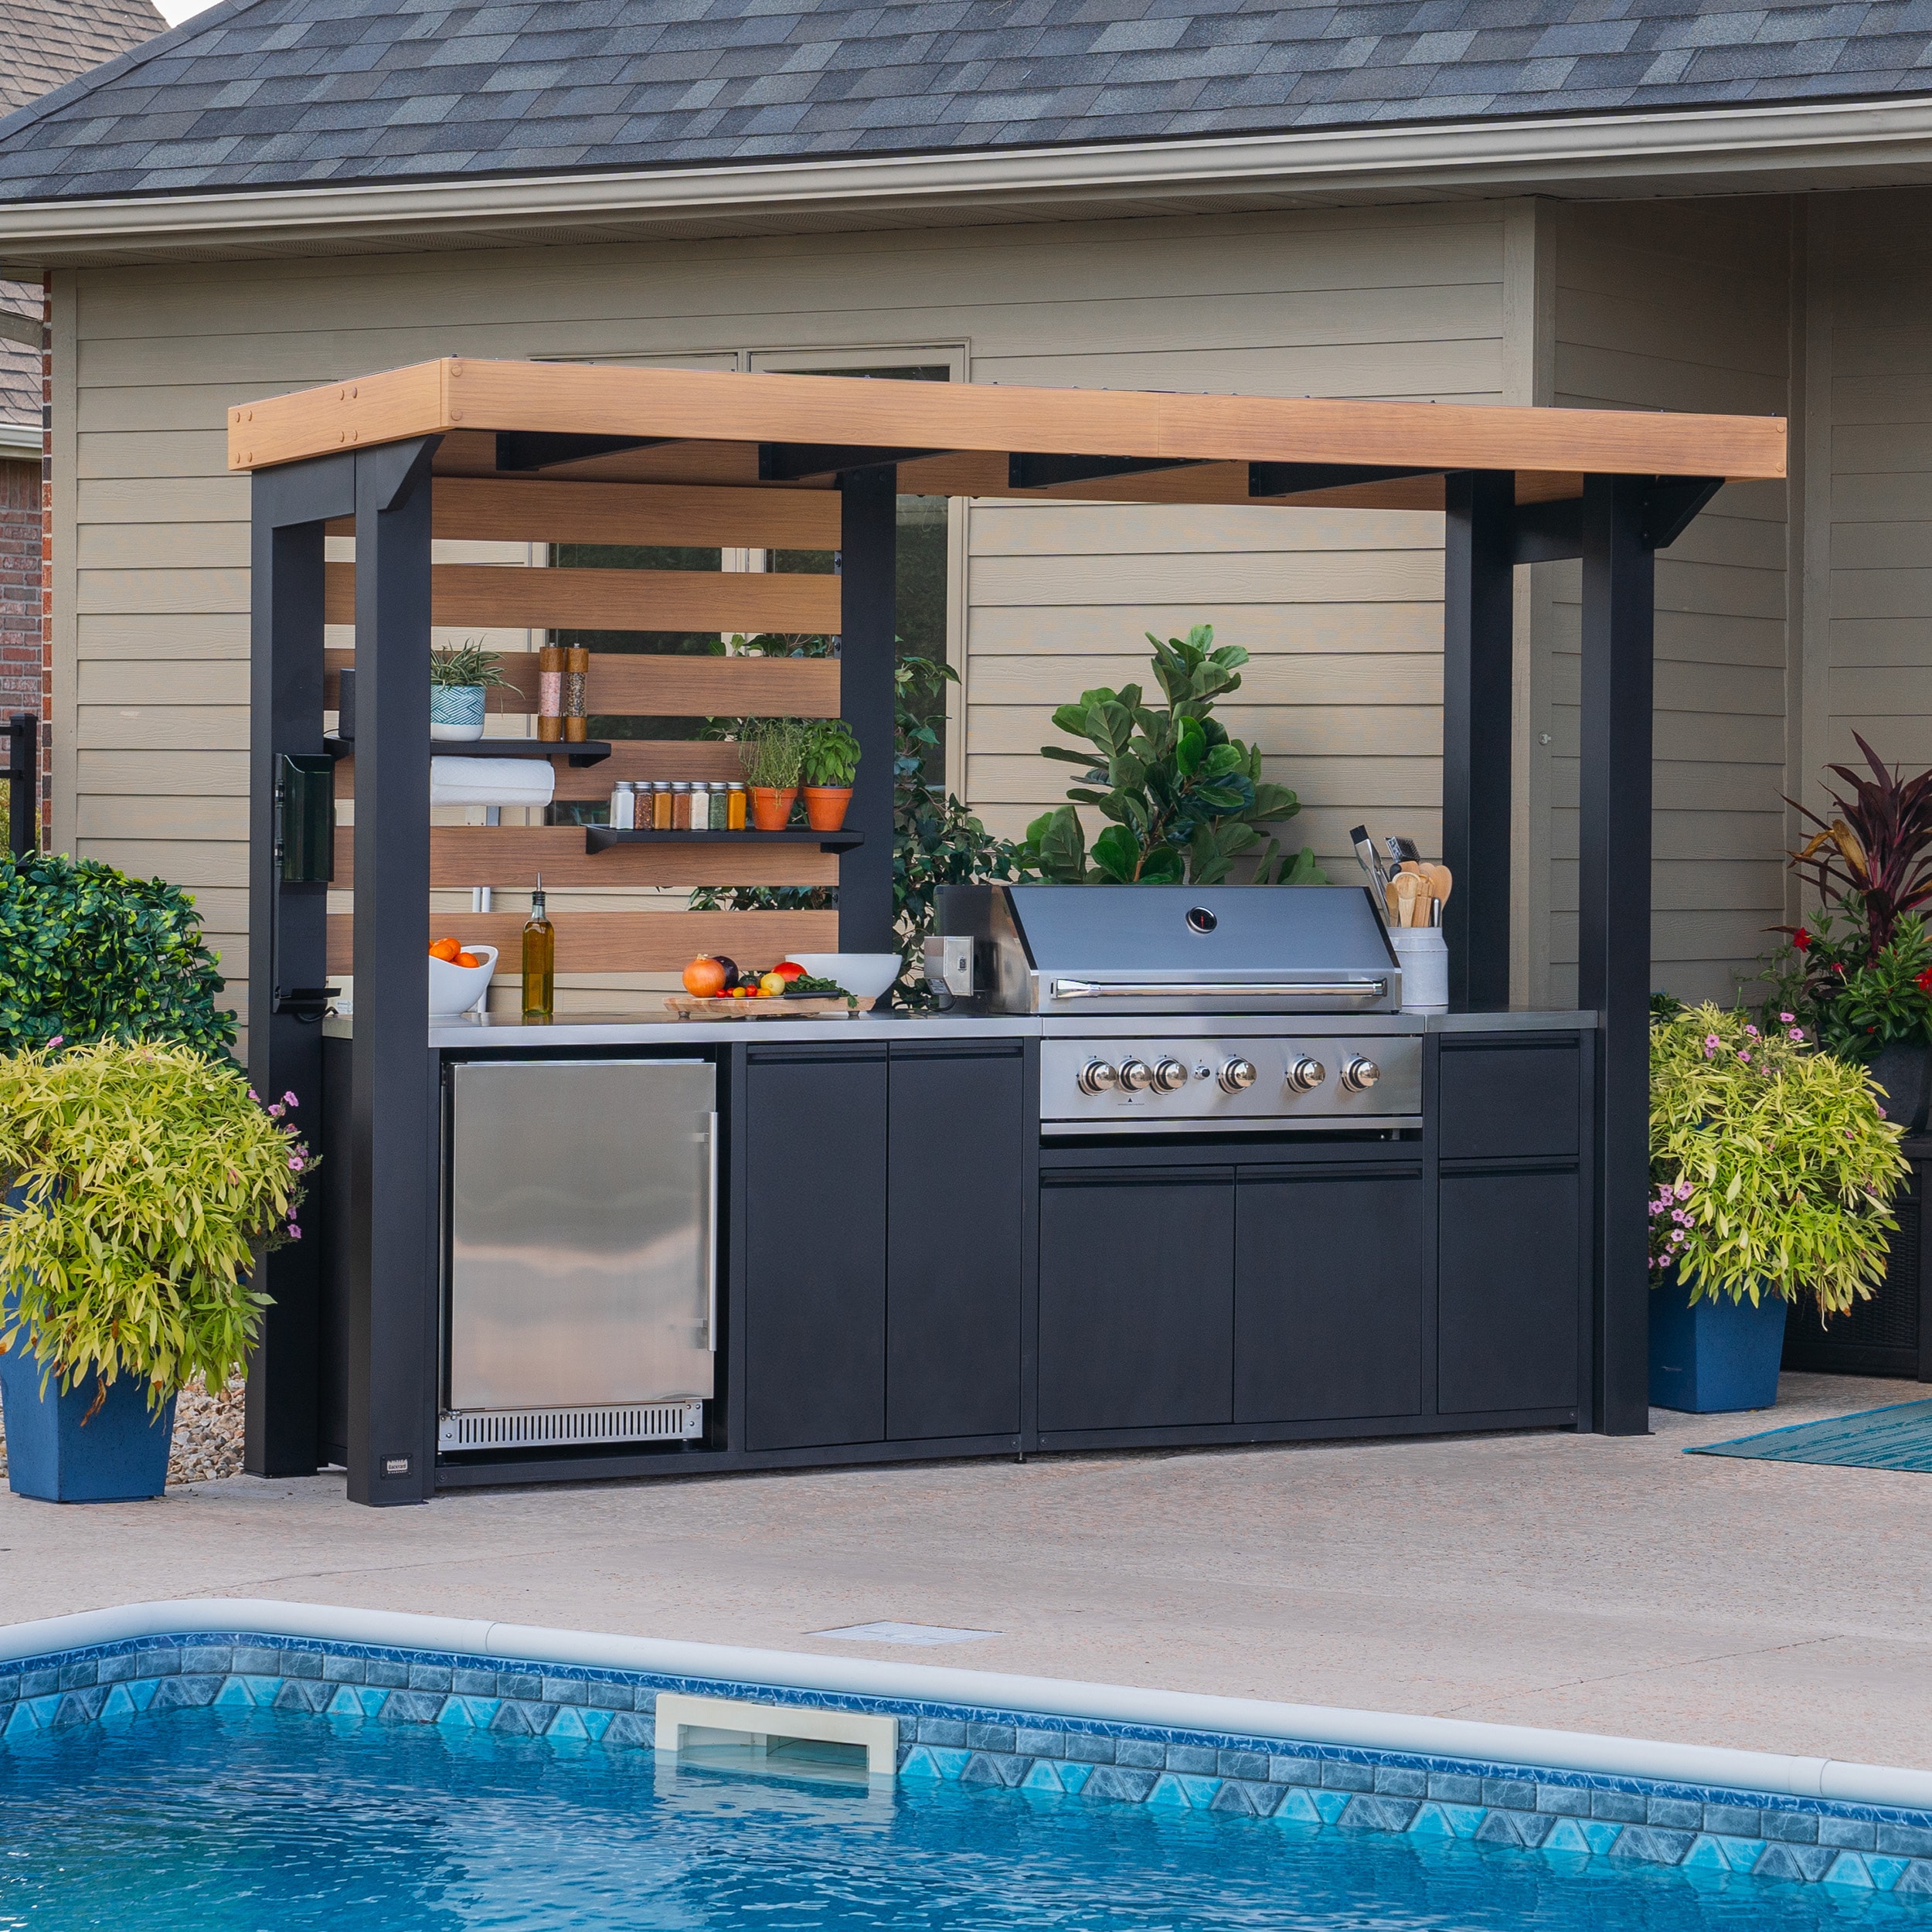 Outdoor Kitchen Prep Station: What It Is, Best Options, and 4